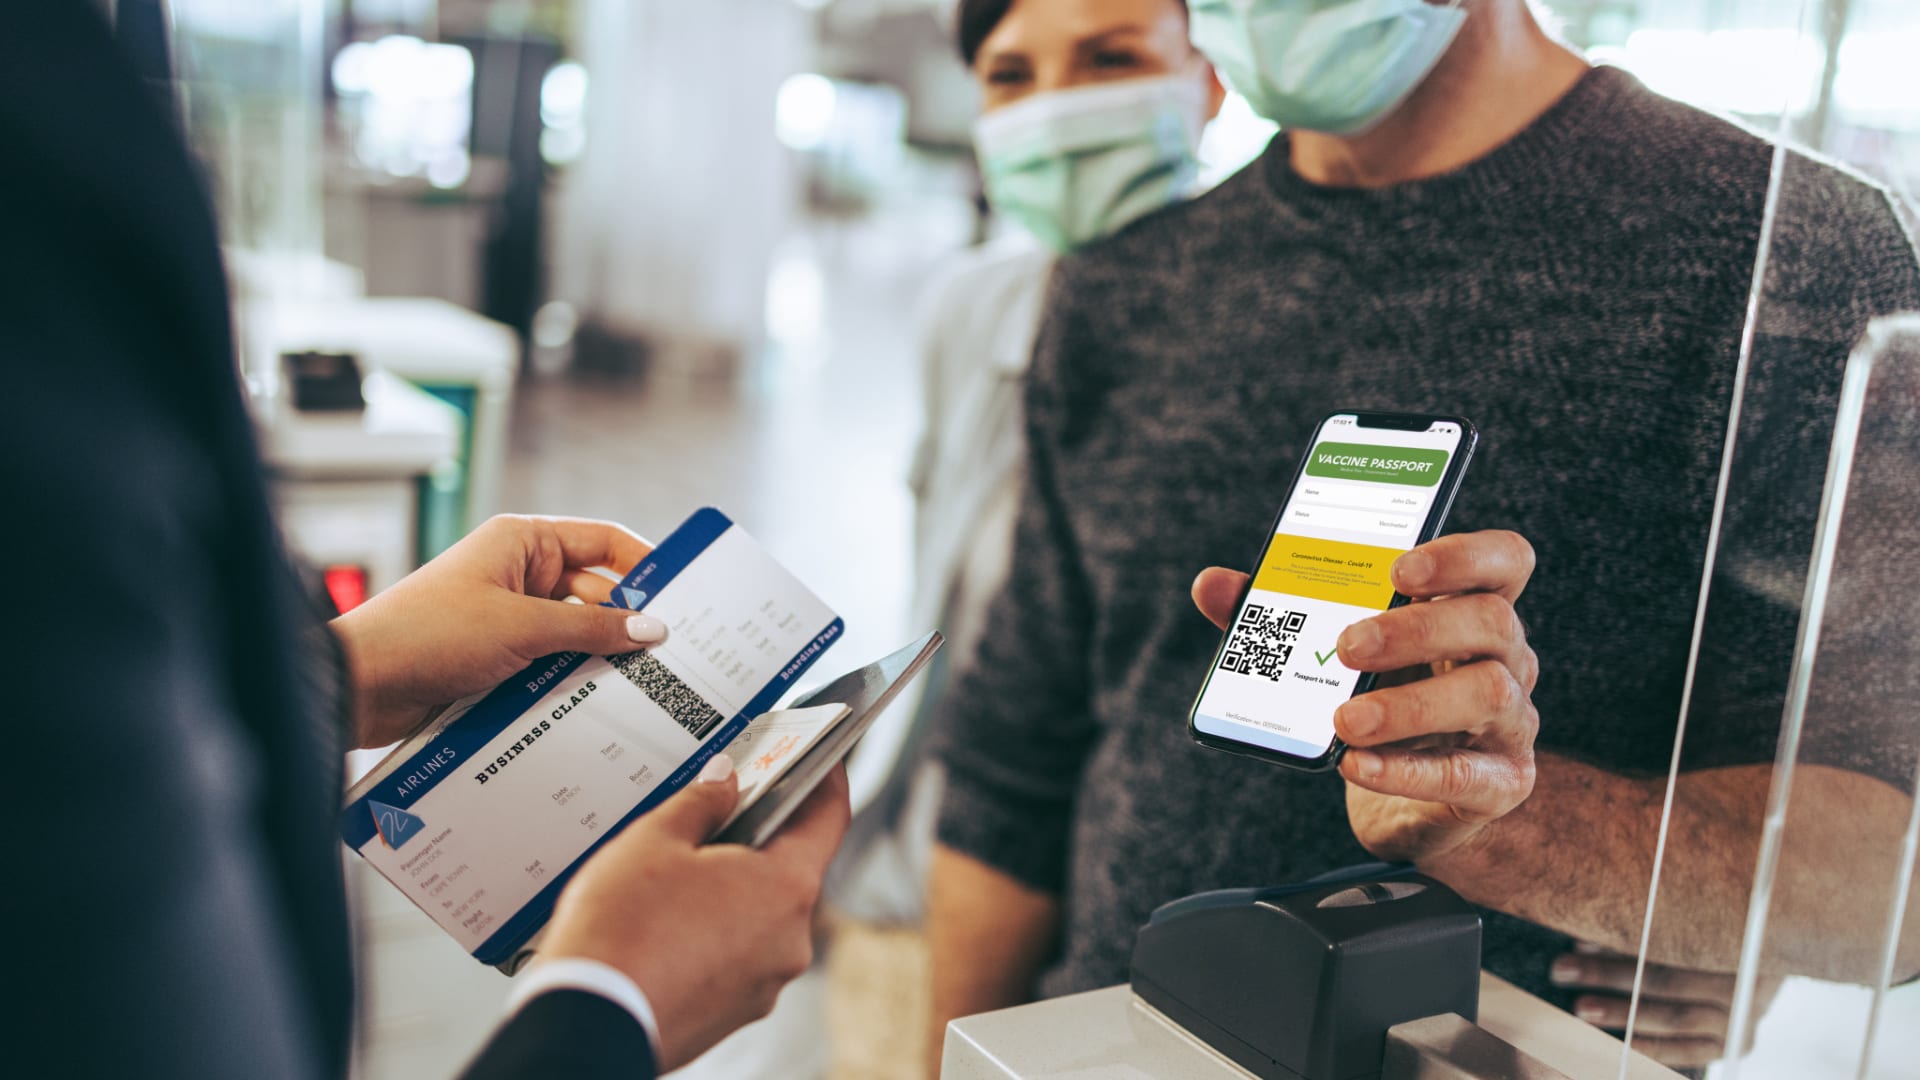 Are travel health apps the key to restart international air travel?